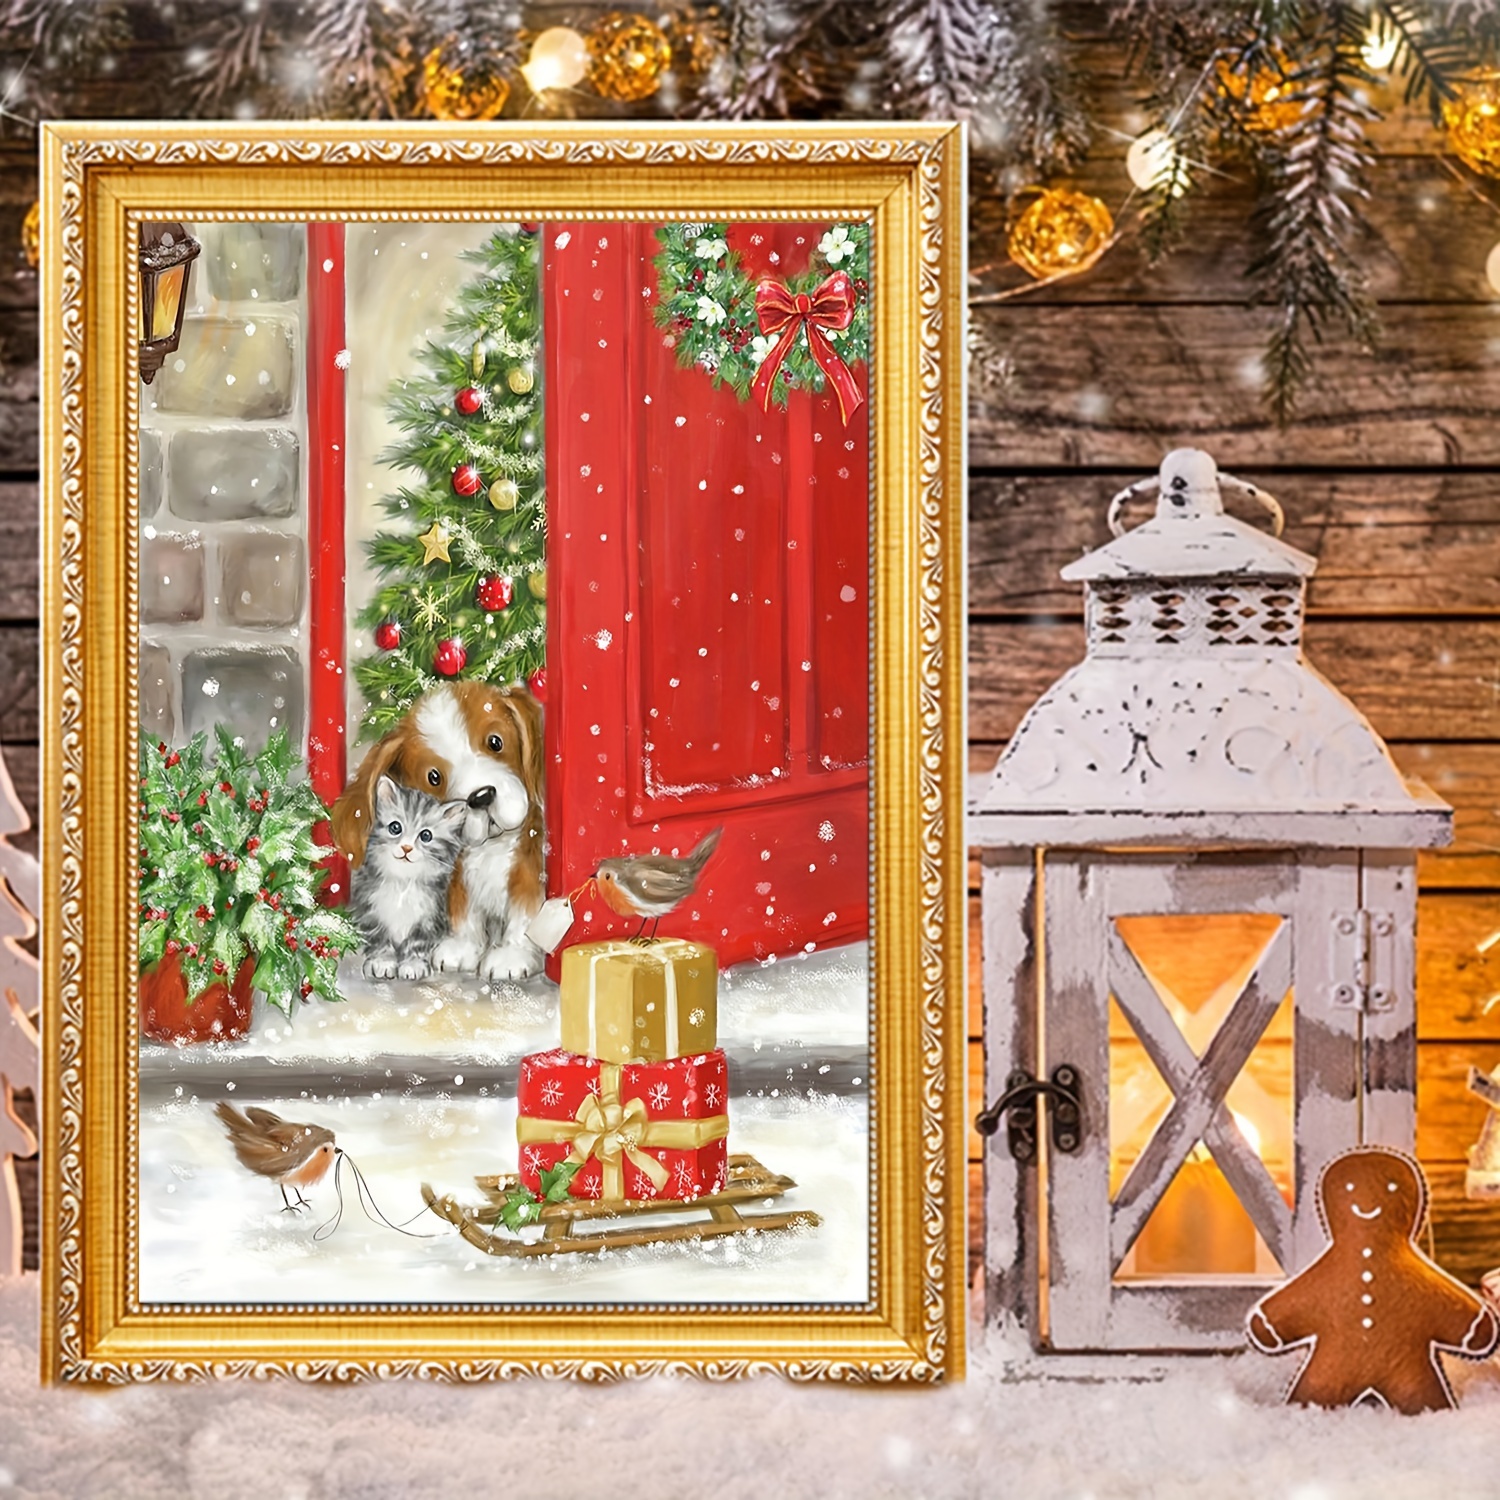 5d Christmas Diamond Painting Kits For Adults,dimond Dotz Full Drill  Diamond Gem Art Kits Snowman Craft Paint By Number For Home Wall Decor